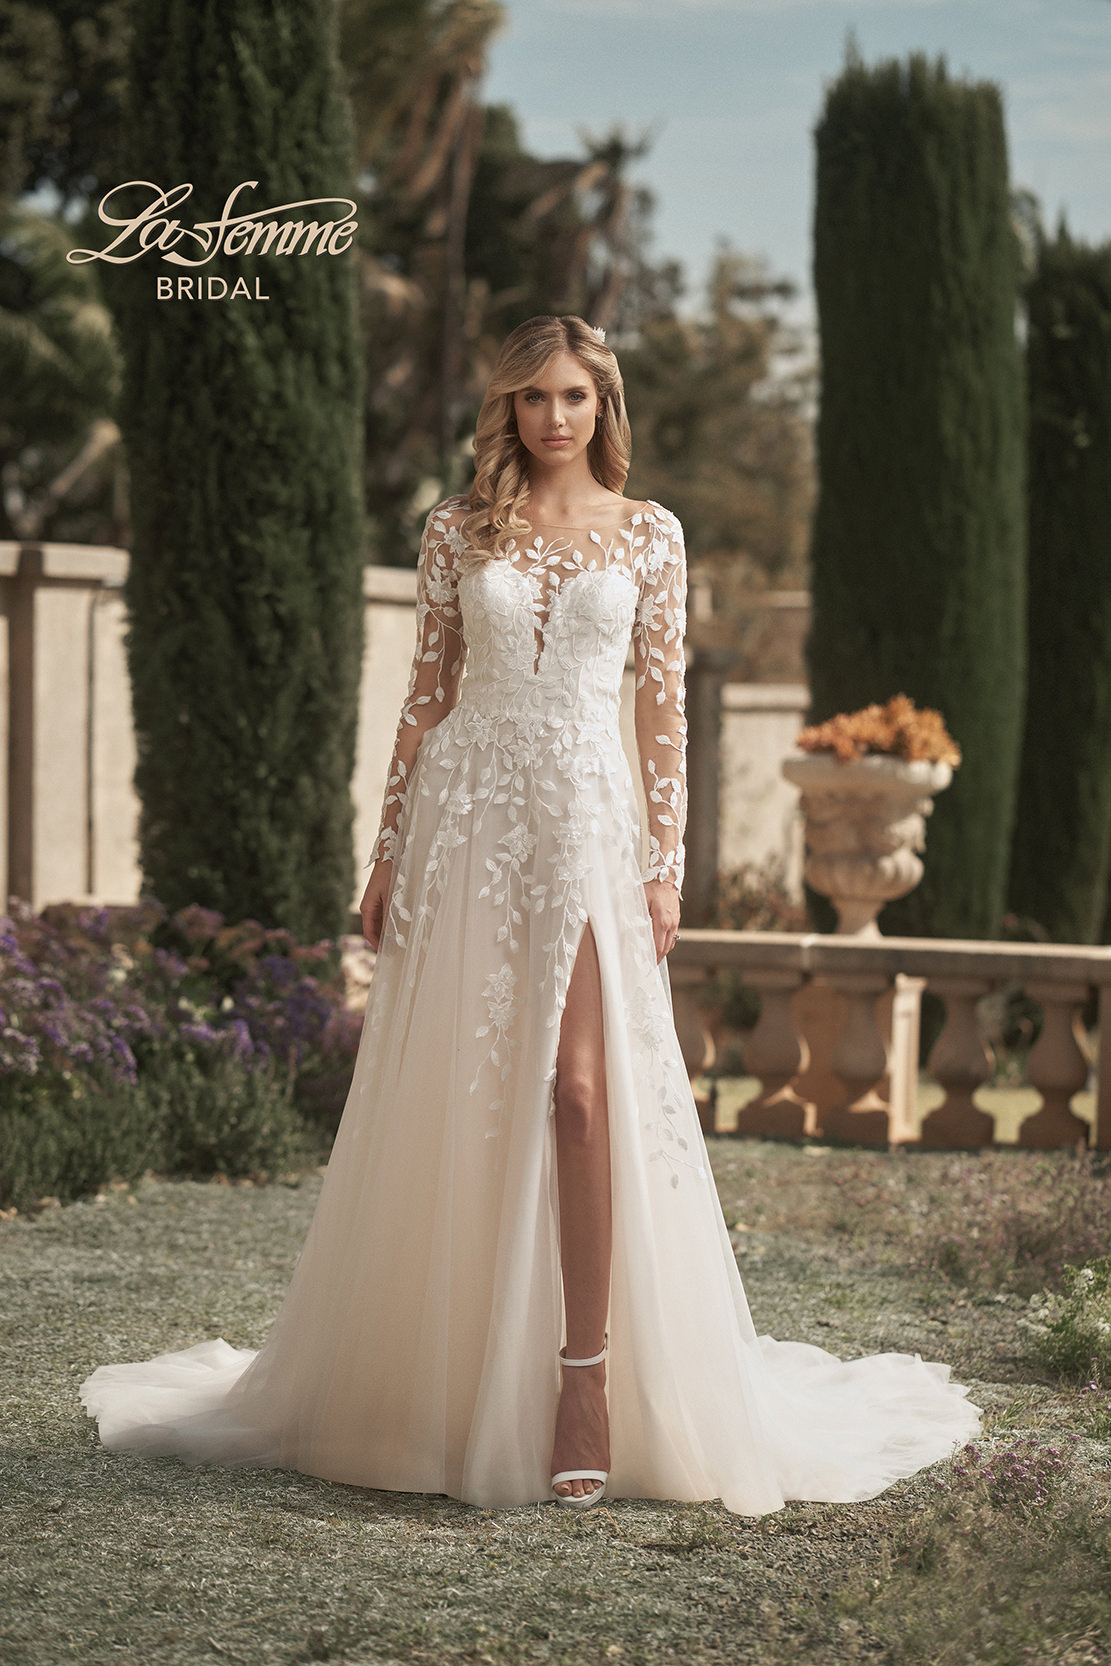 Style 44407: Long Sleeve Fit and Flare Bridal Gown with Illusion Back |  Sincerity Bridal | Sincerity bridal, Wedding dress long sleeve, Bridal gowns